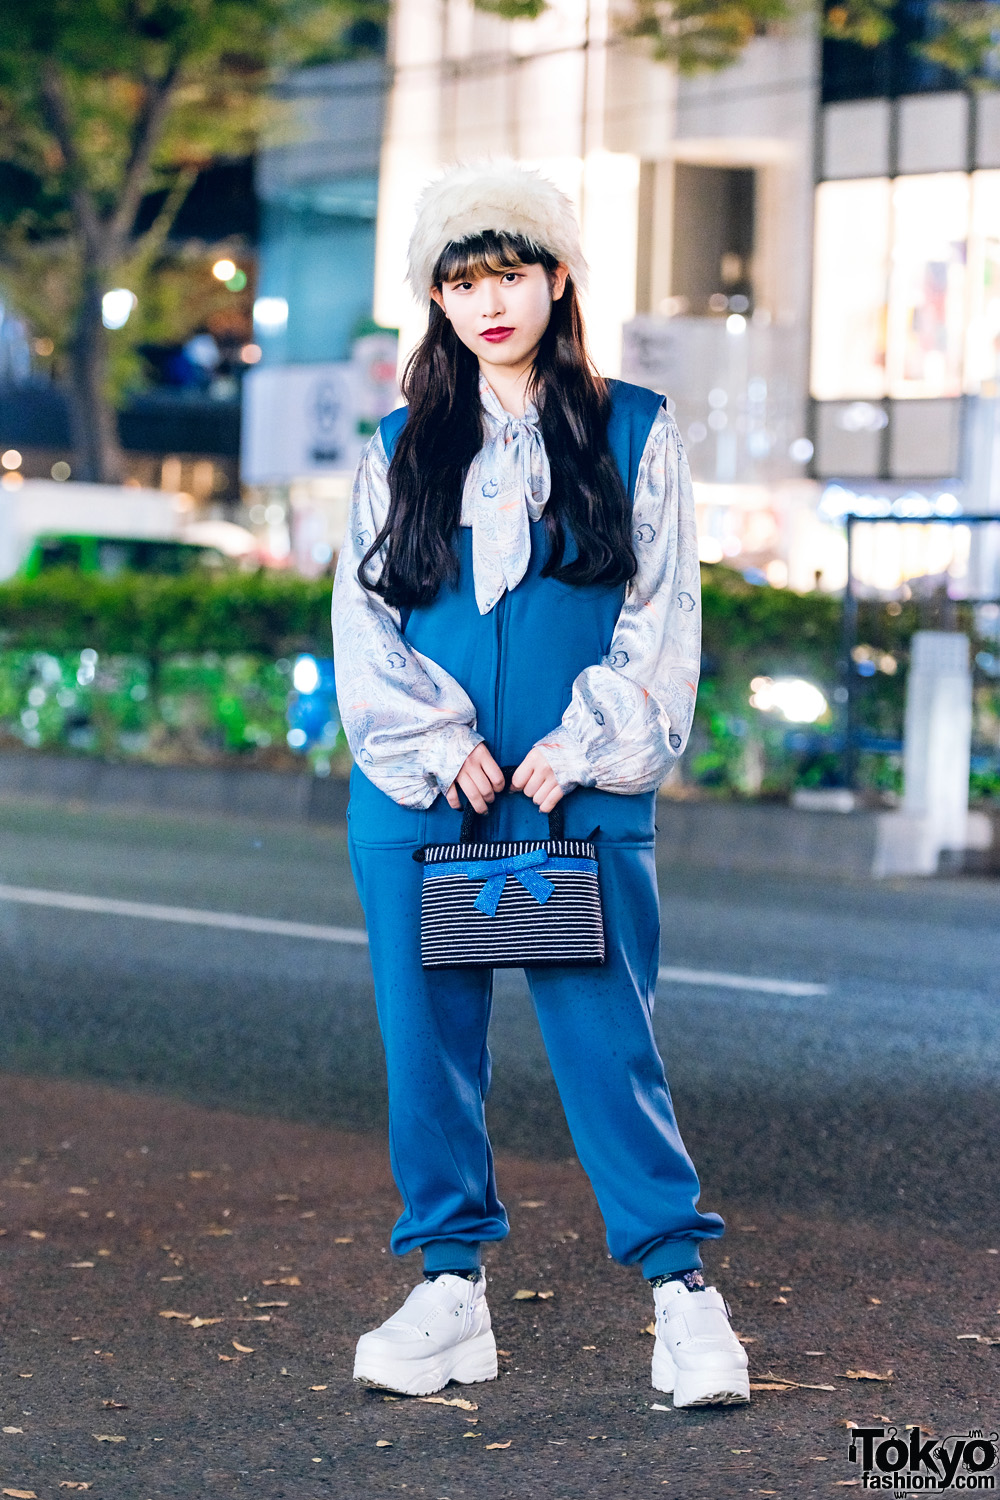 Tokyo Style w/ Furry Pillbox Hat, Zip-Up Jumpsuit, Paisley Bow Blouse, Beaded Bow Bag & Chunky Sneakers